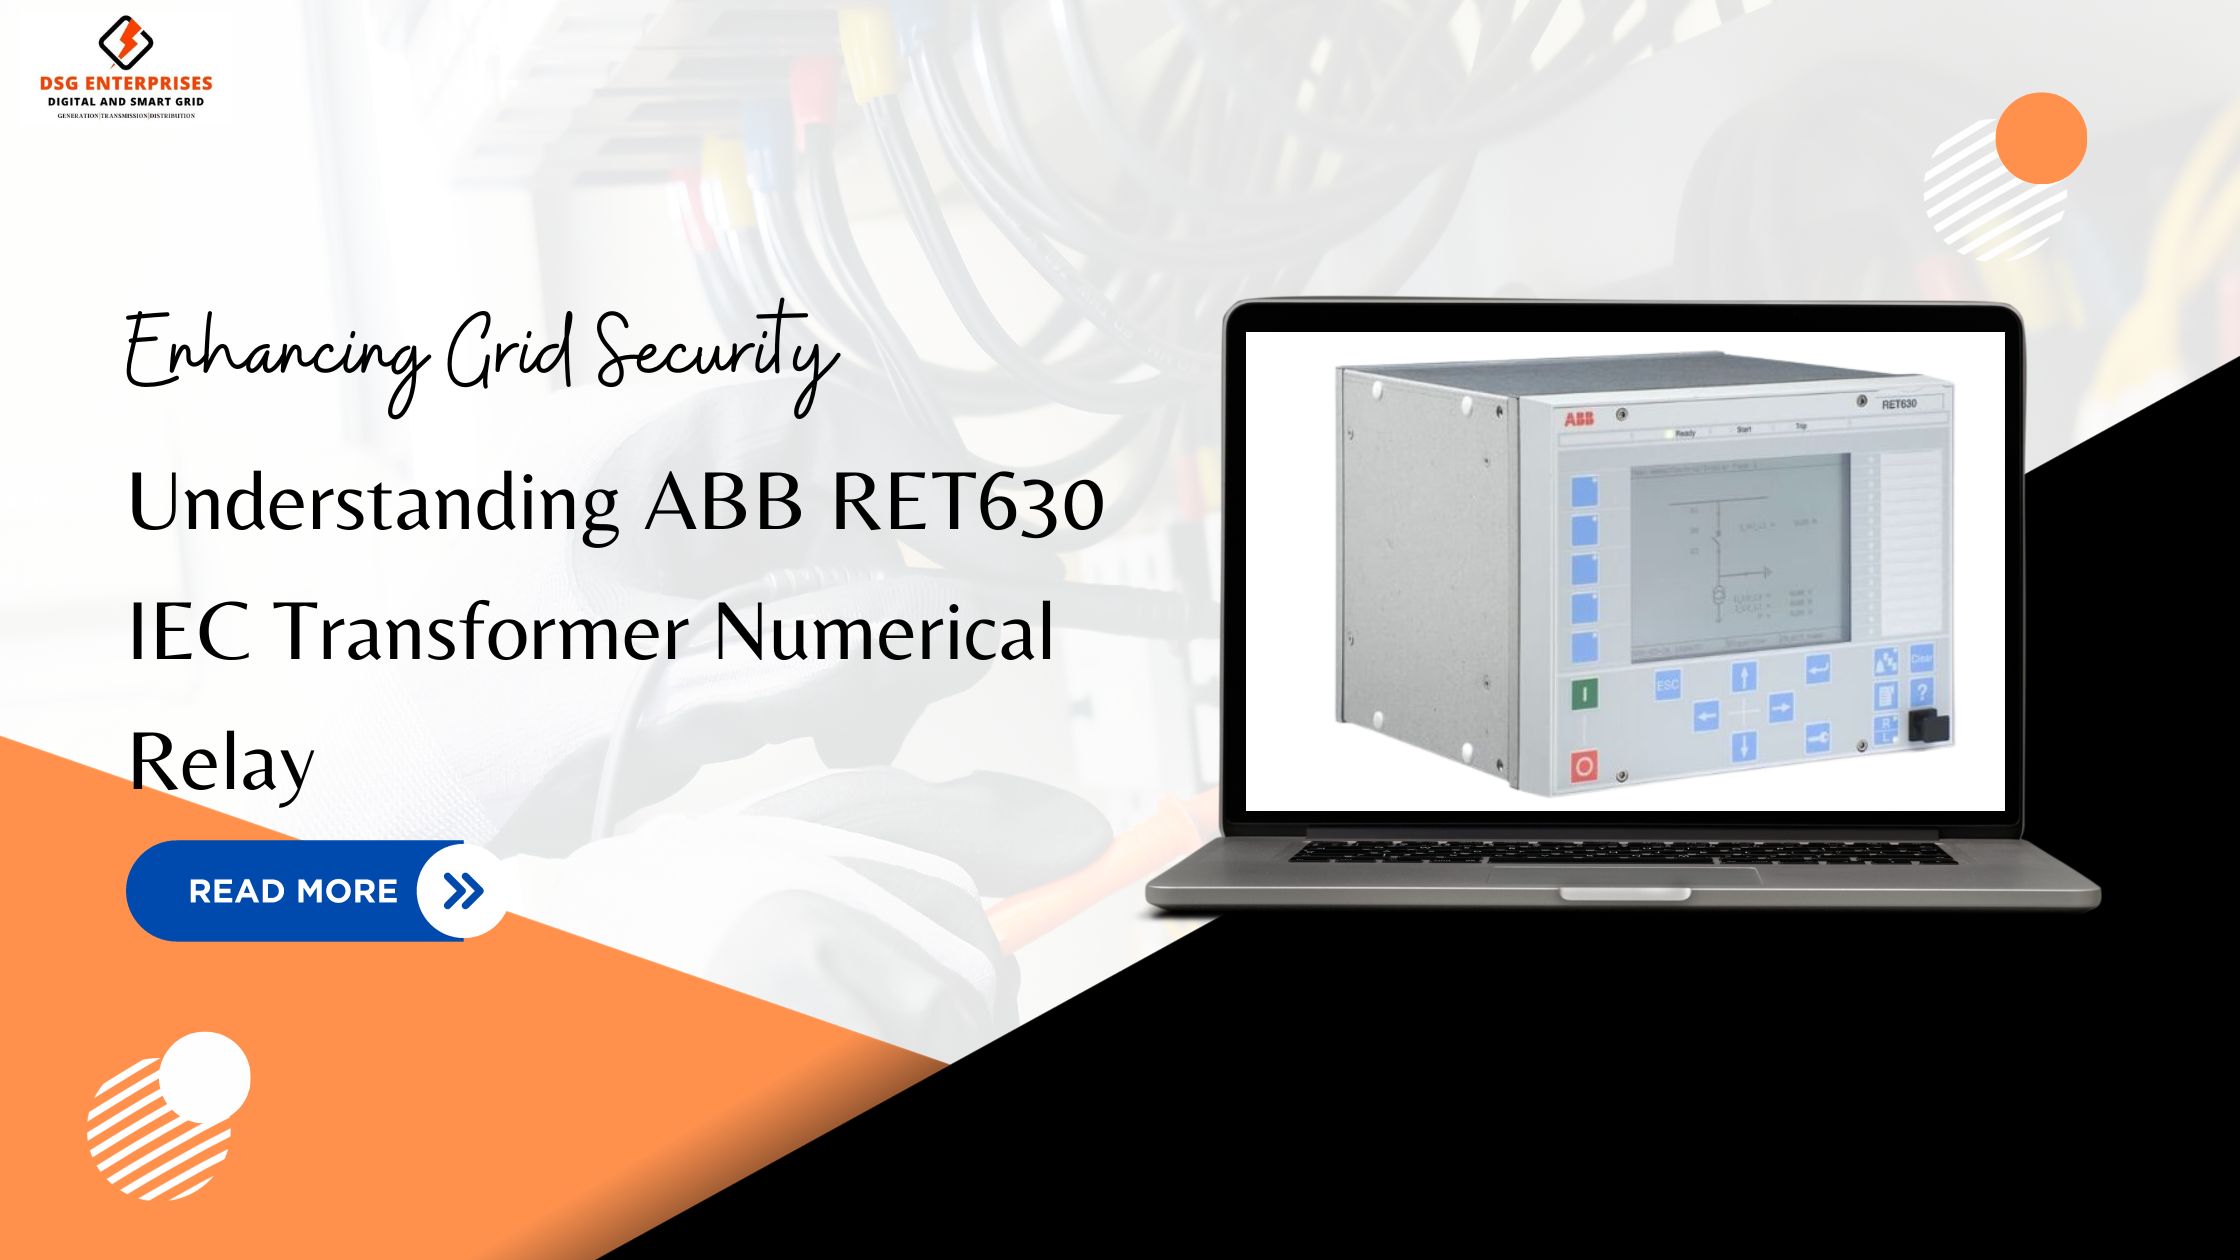 You are currently viewing Enhancing Grid Security: Understanding ABB RET630 IEC Transformer Numerical Relay